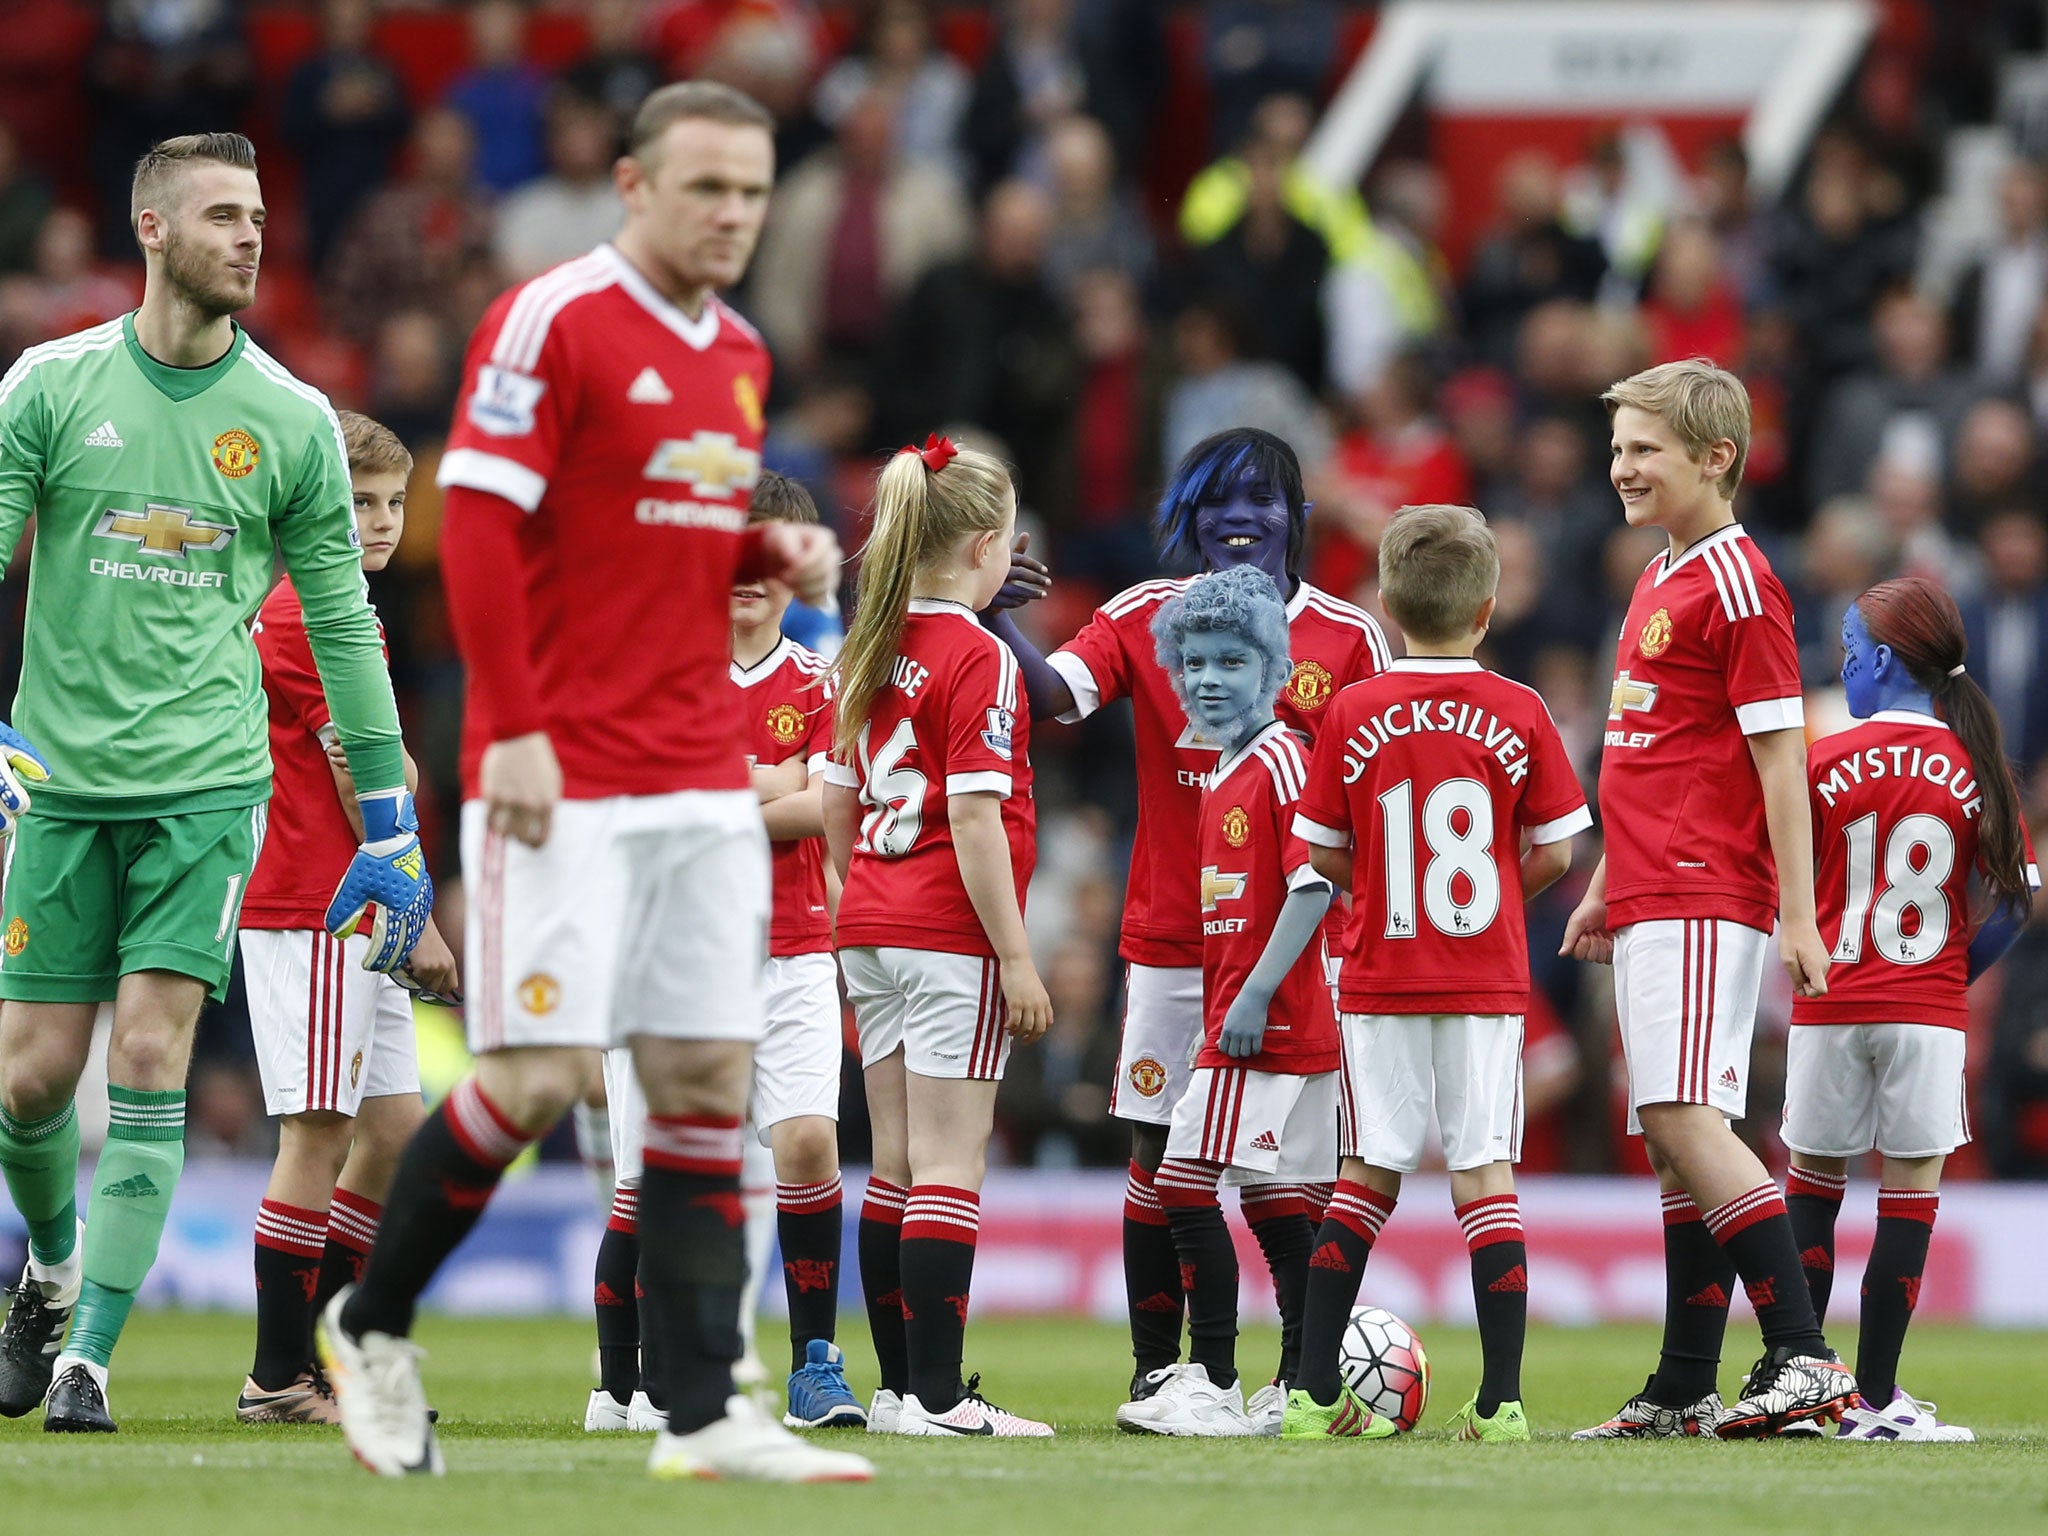 Wayne Rooney and David De Gea take to the pitch with the blue-faced mascots at Old Trafford on Tuesday night (Reuters).